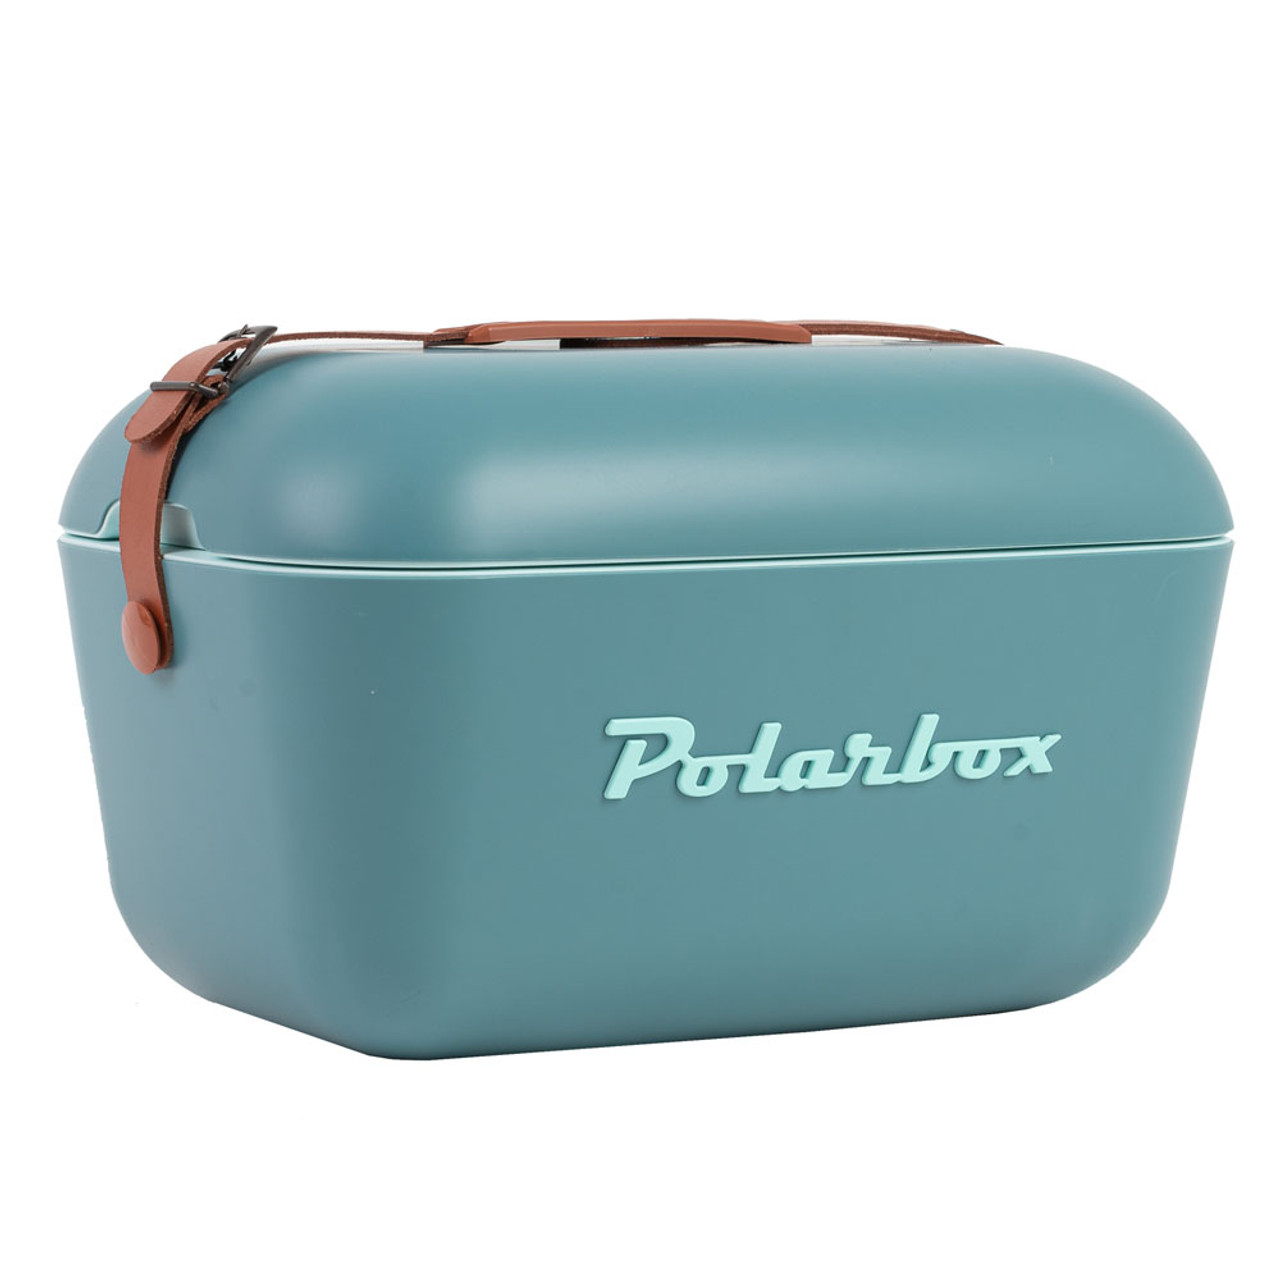 Polarbox Classic 13 Cooler in Ocean Blue | Eagle Eye Outfitters